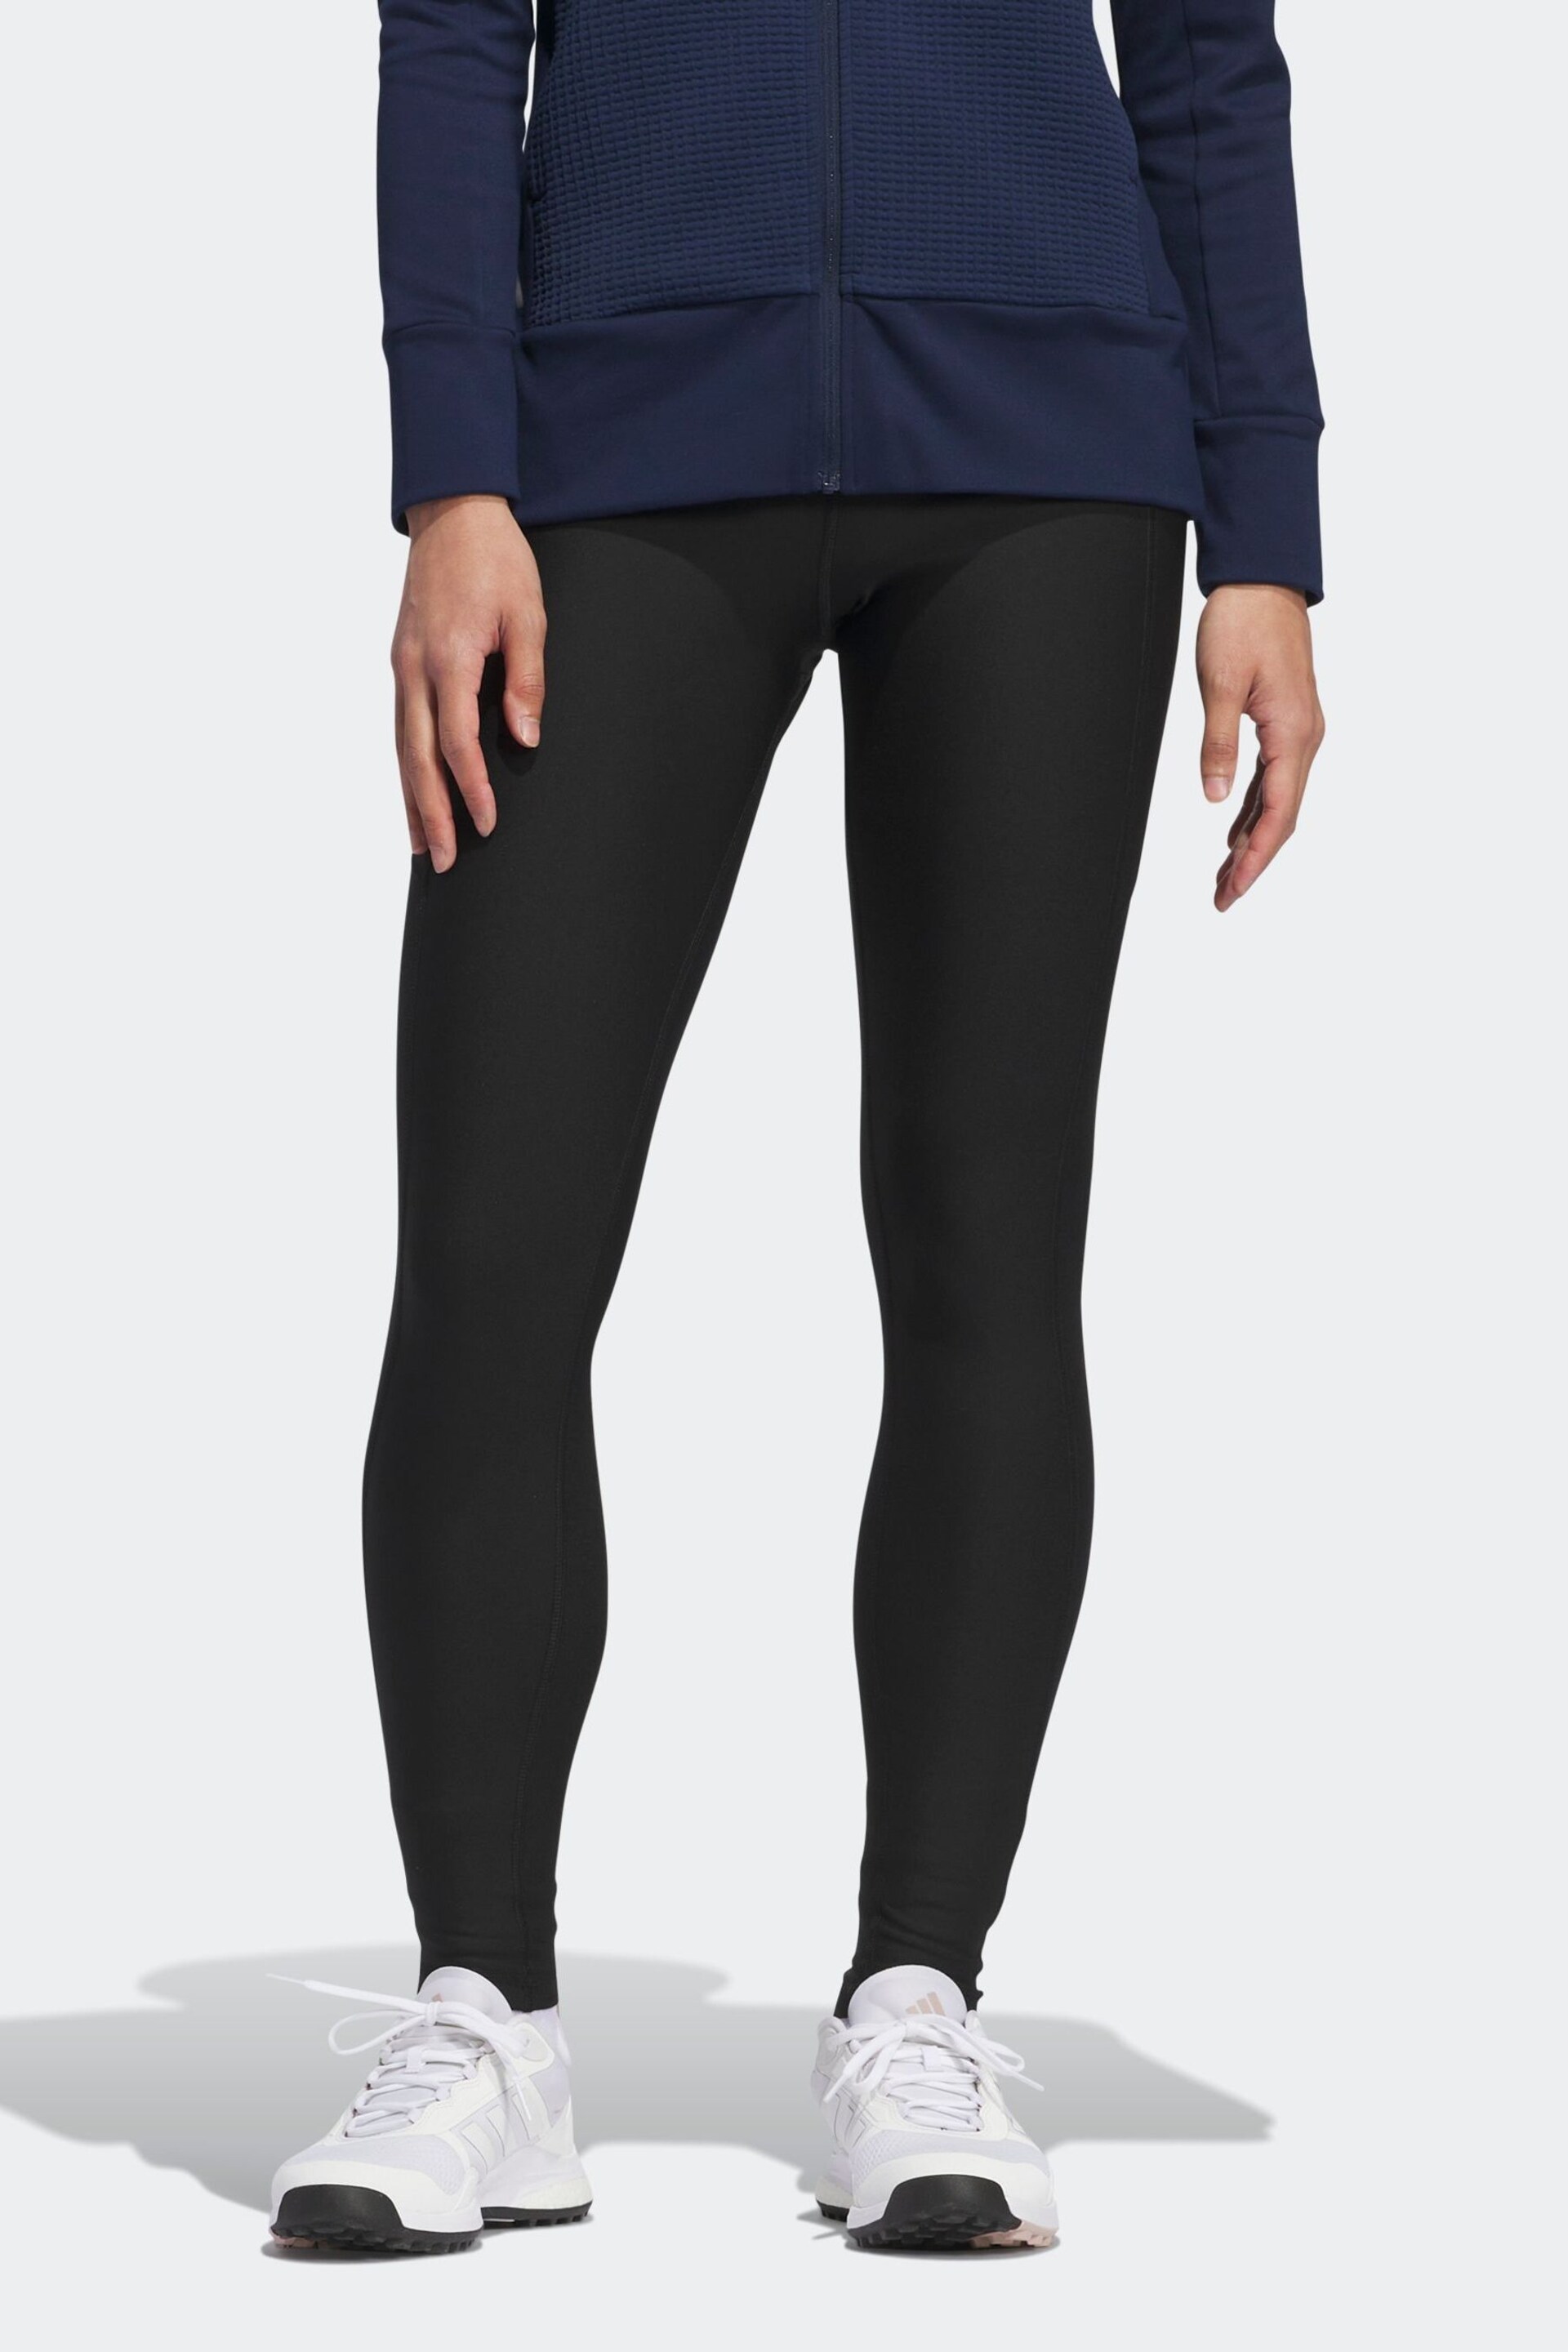 adidas Golf Ultimate365 COLD.RDY Leggings - Image 1 of 5